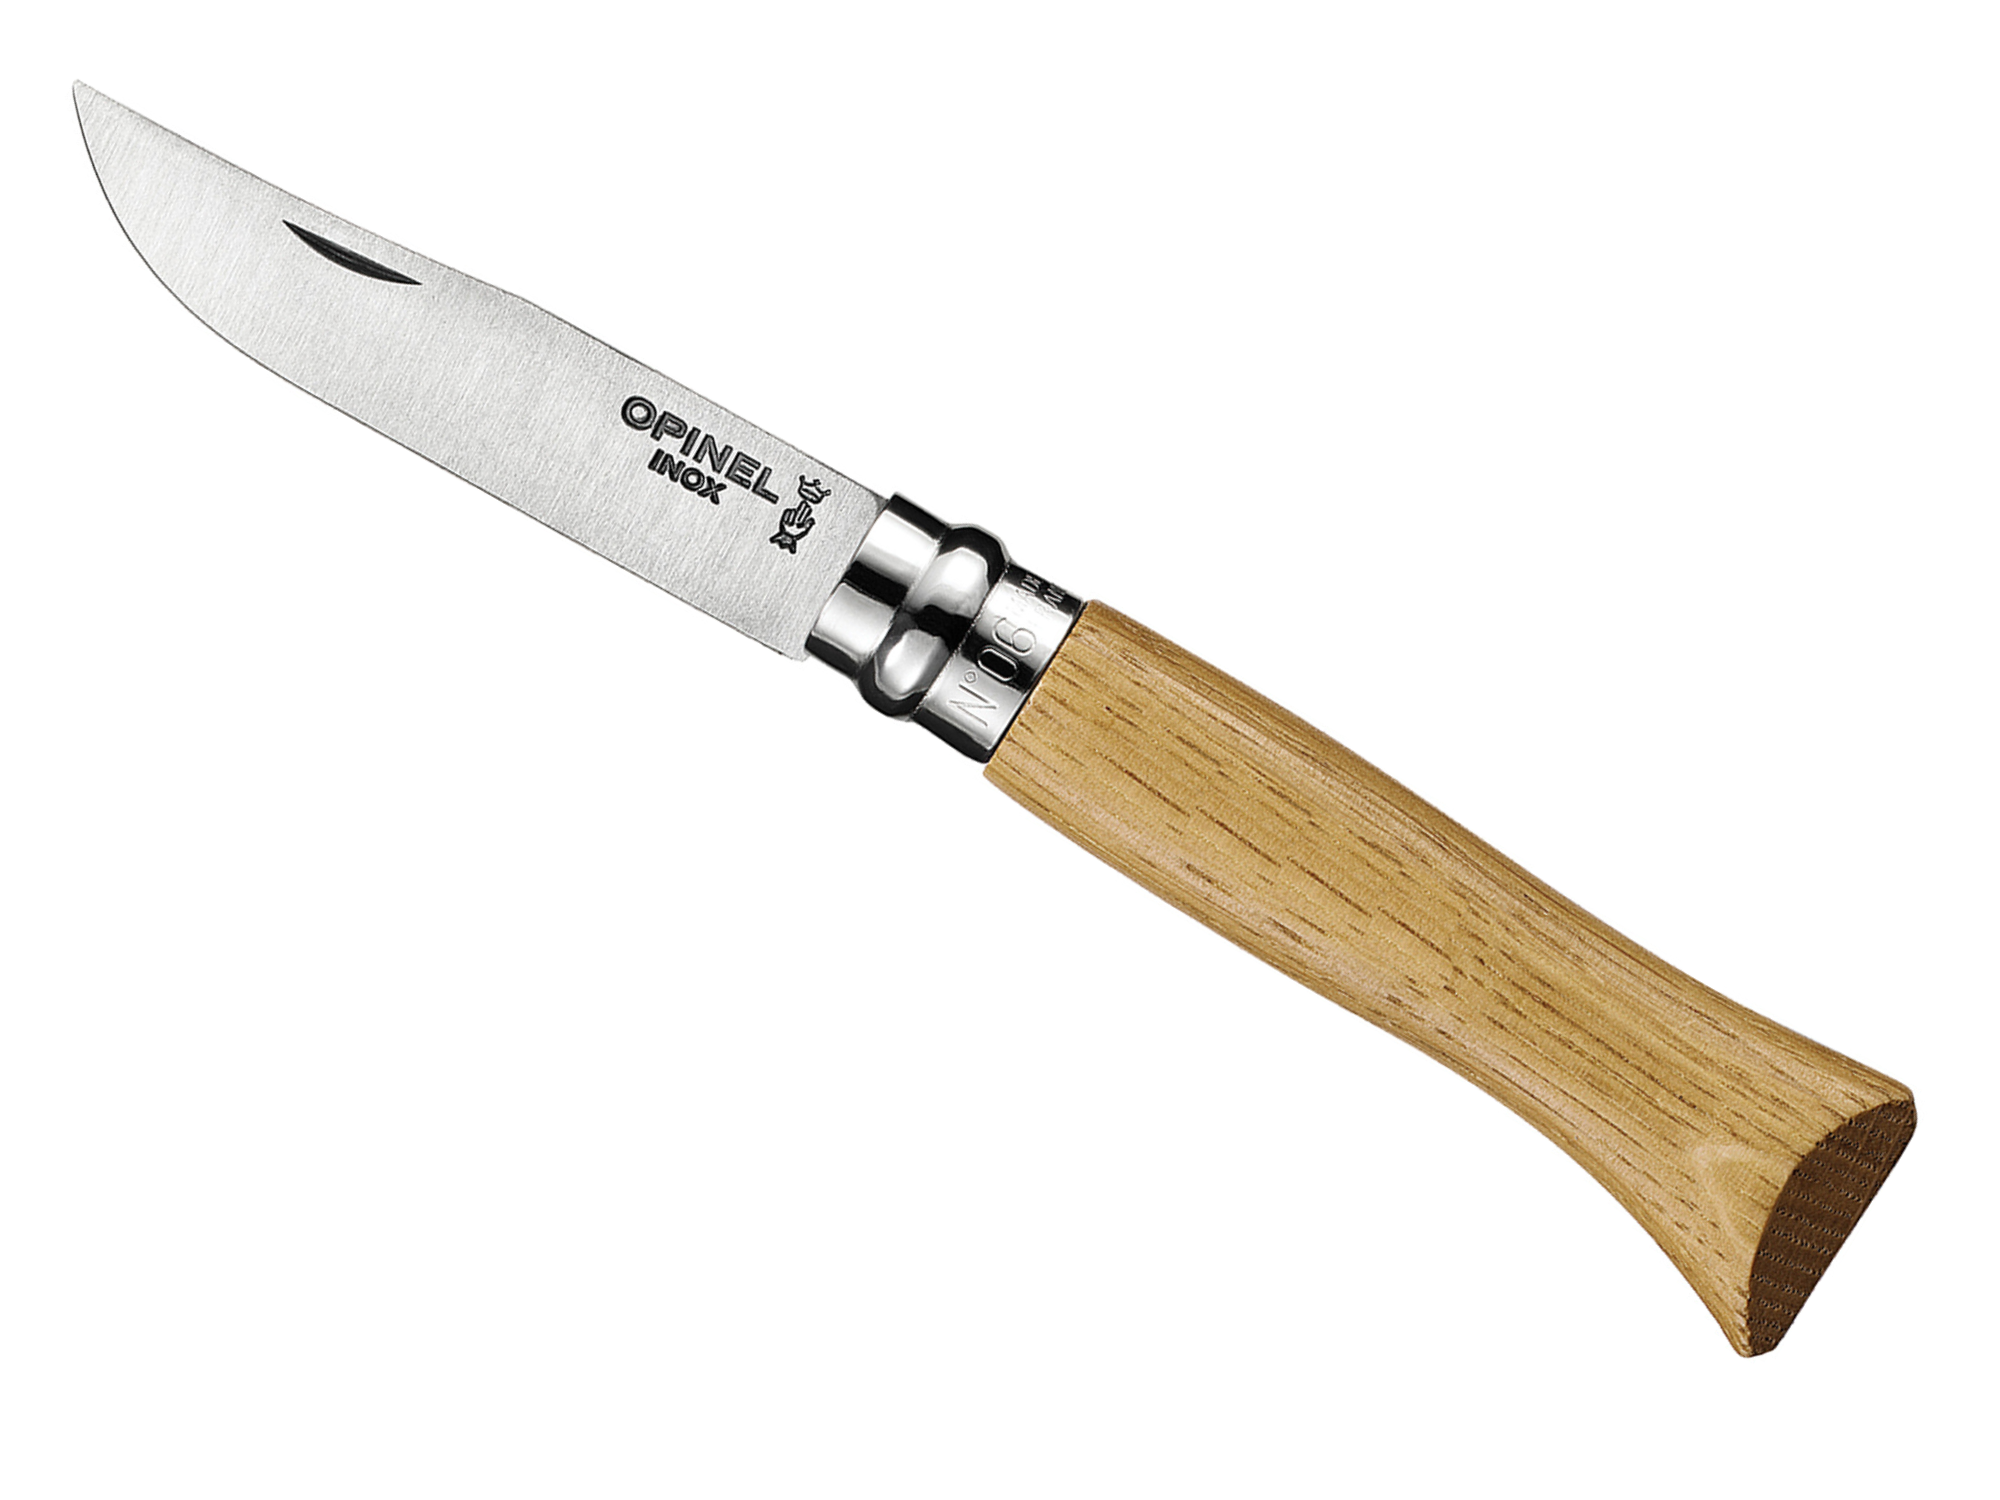 Opinel No 6 Pen Knife – Tinker and Fix